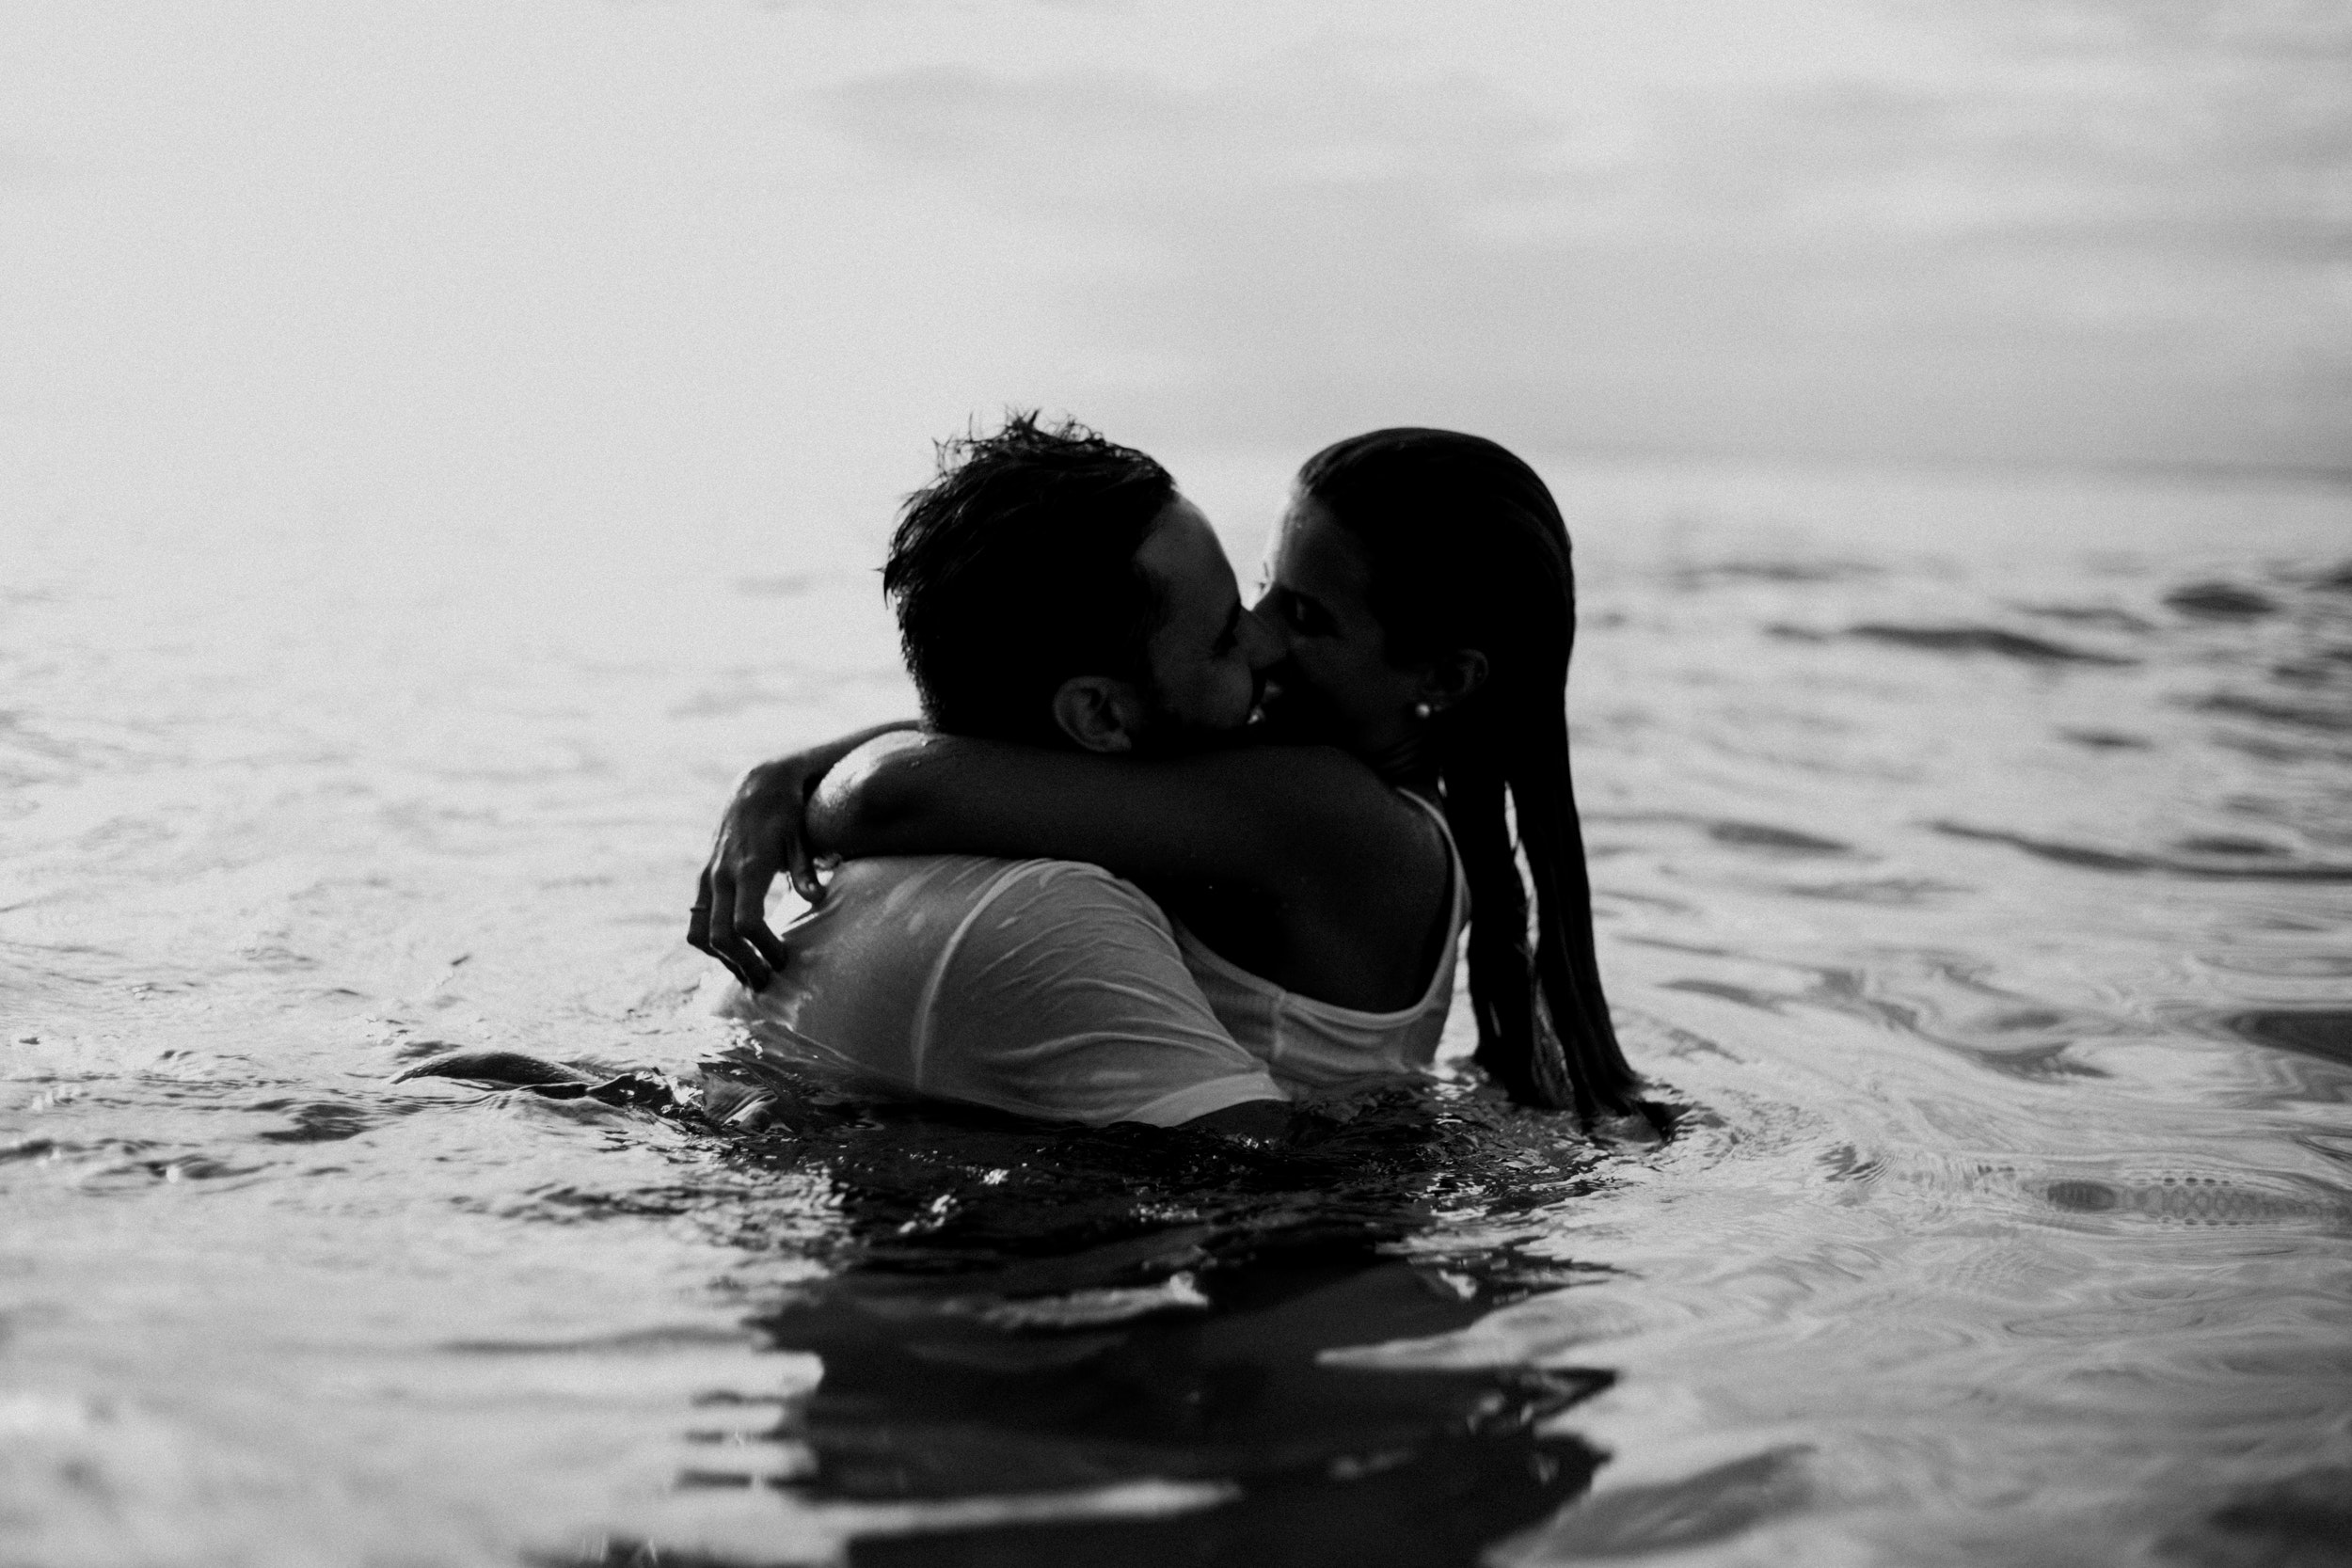 A couple kissing in water. | Source: Pexels